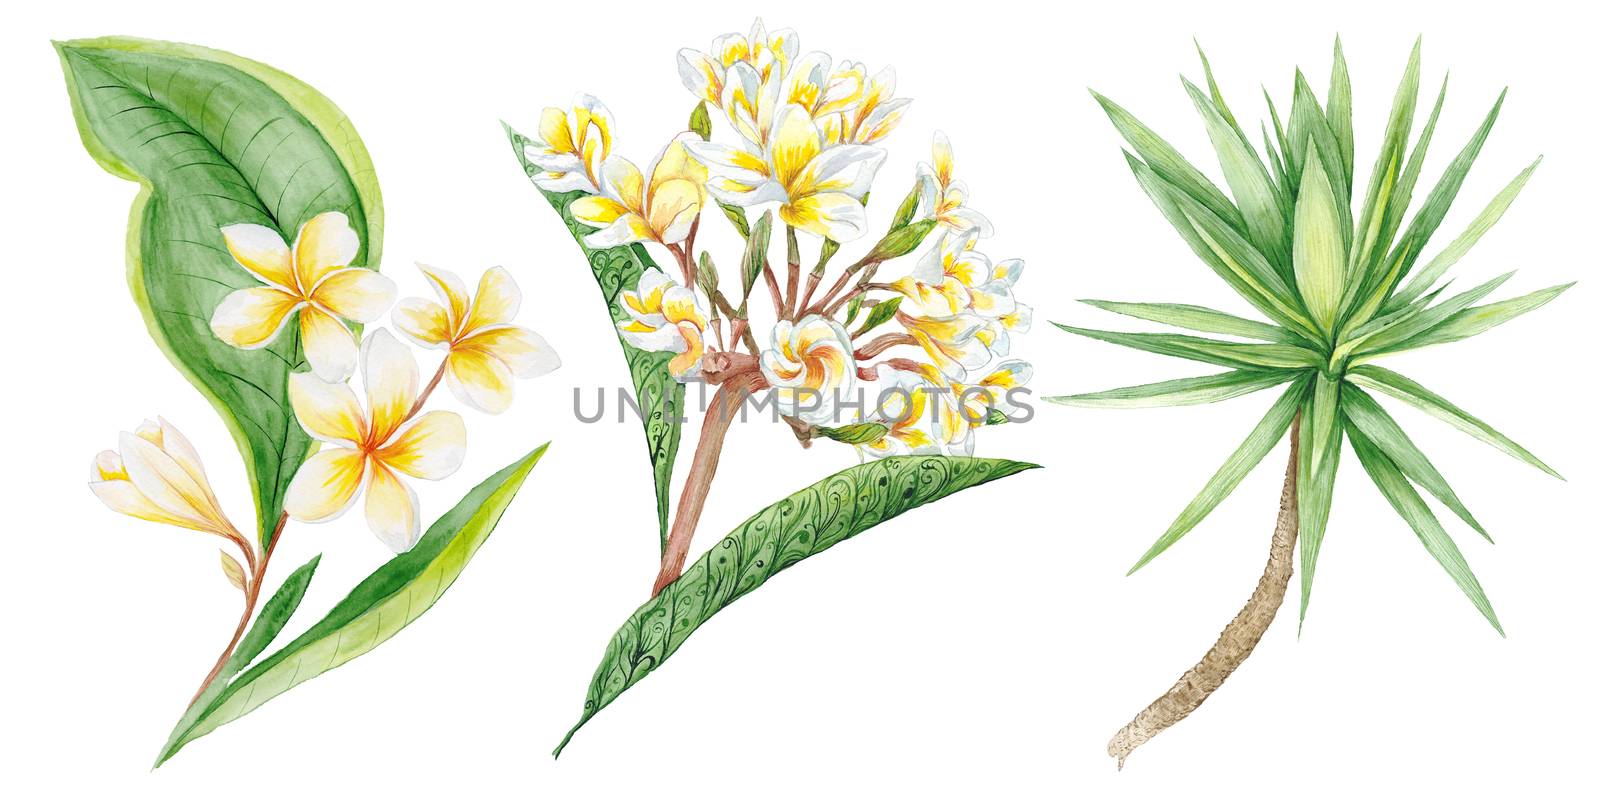 Botanic painting with plumeria brunches and yucca tree for design isolated on white background